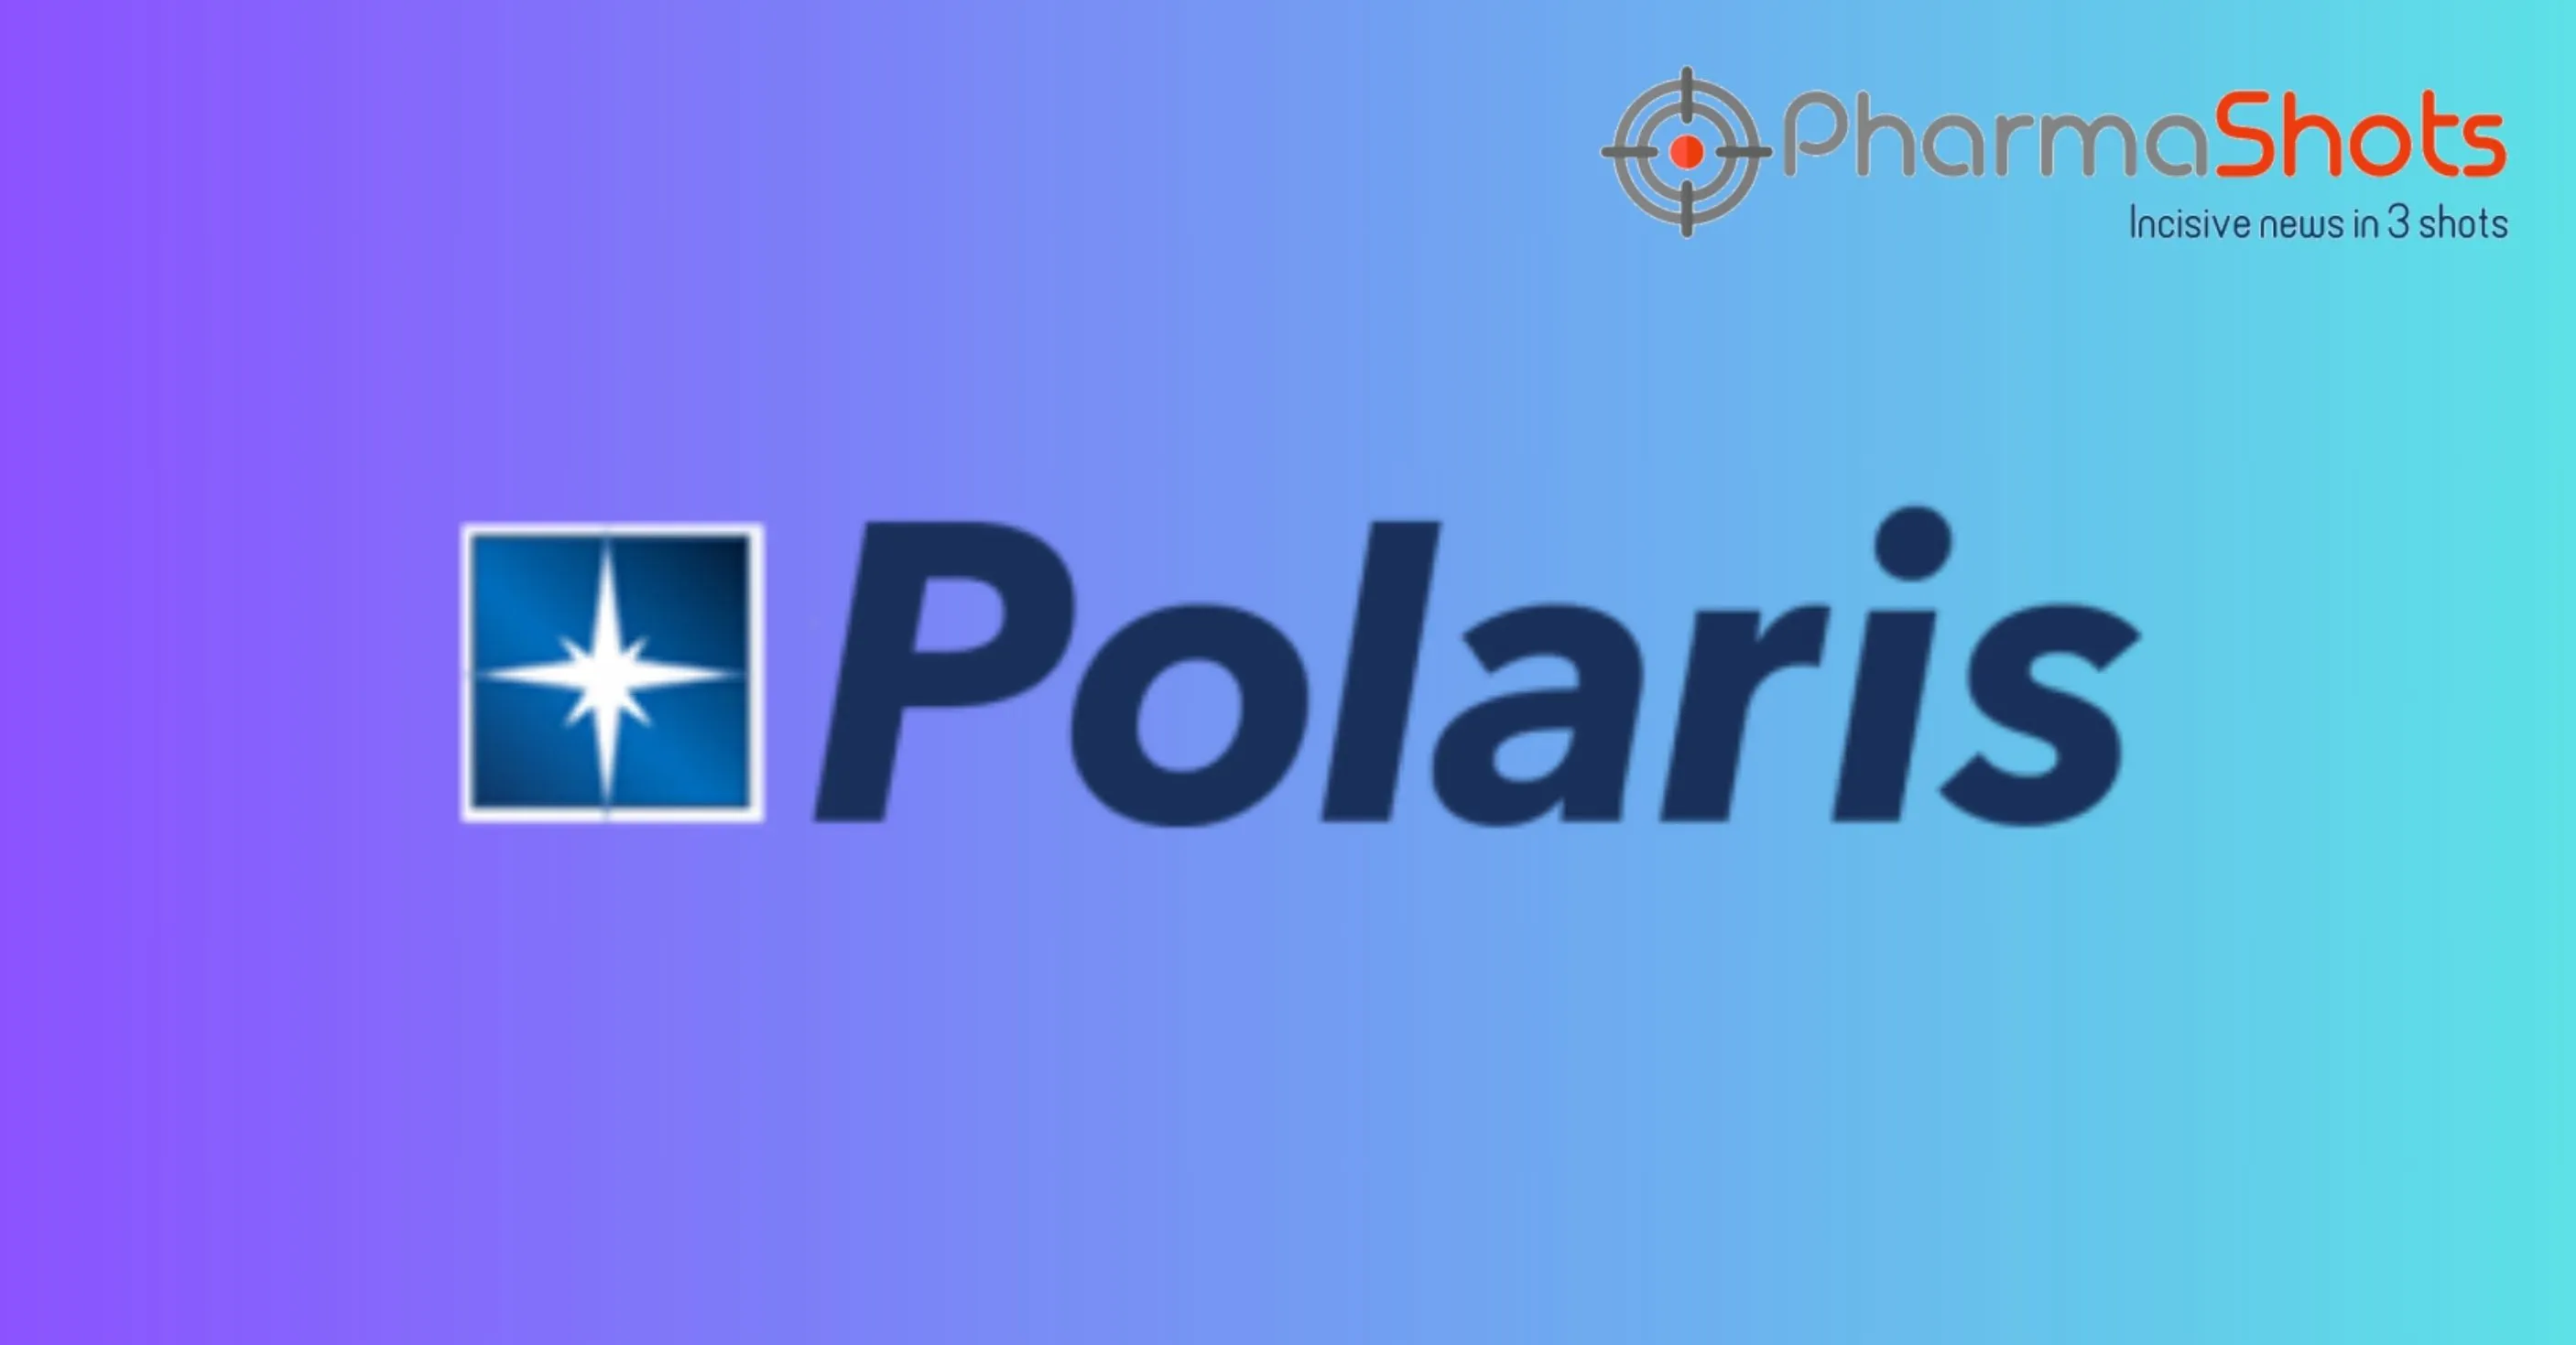 Polaris Group Initiates P-IIa Clinical Study for NASH, Dosing First Patient with ADI-PEG 20